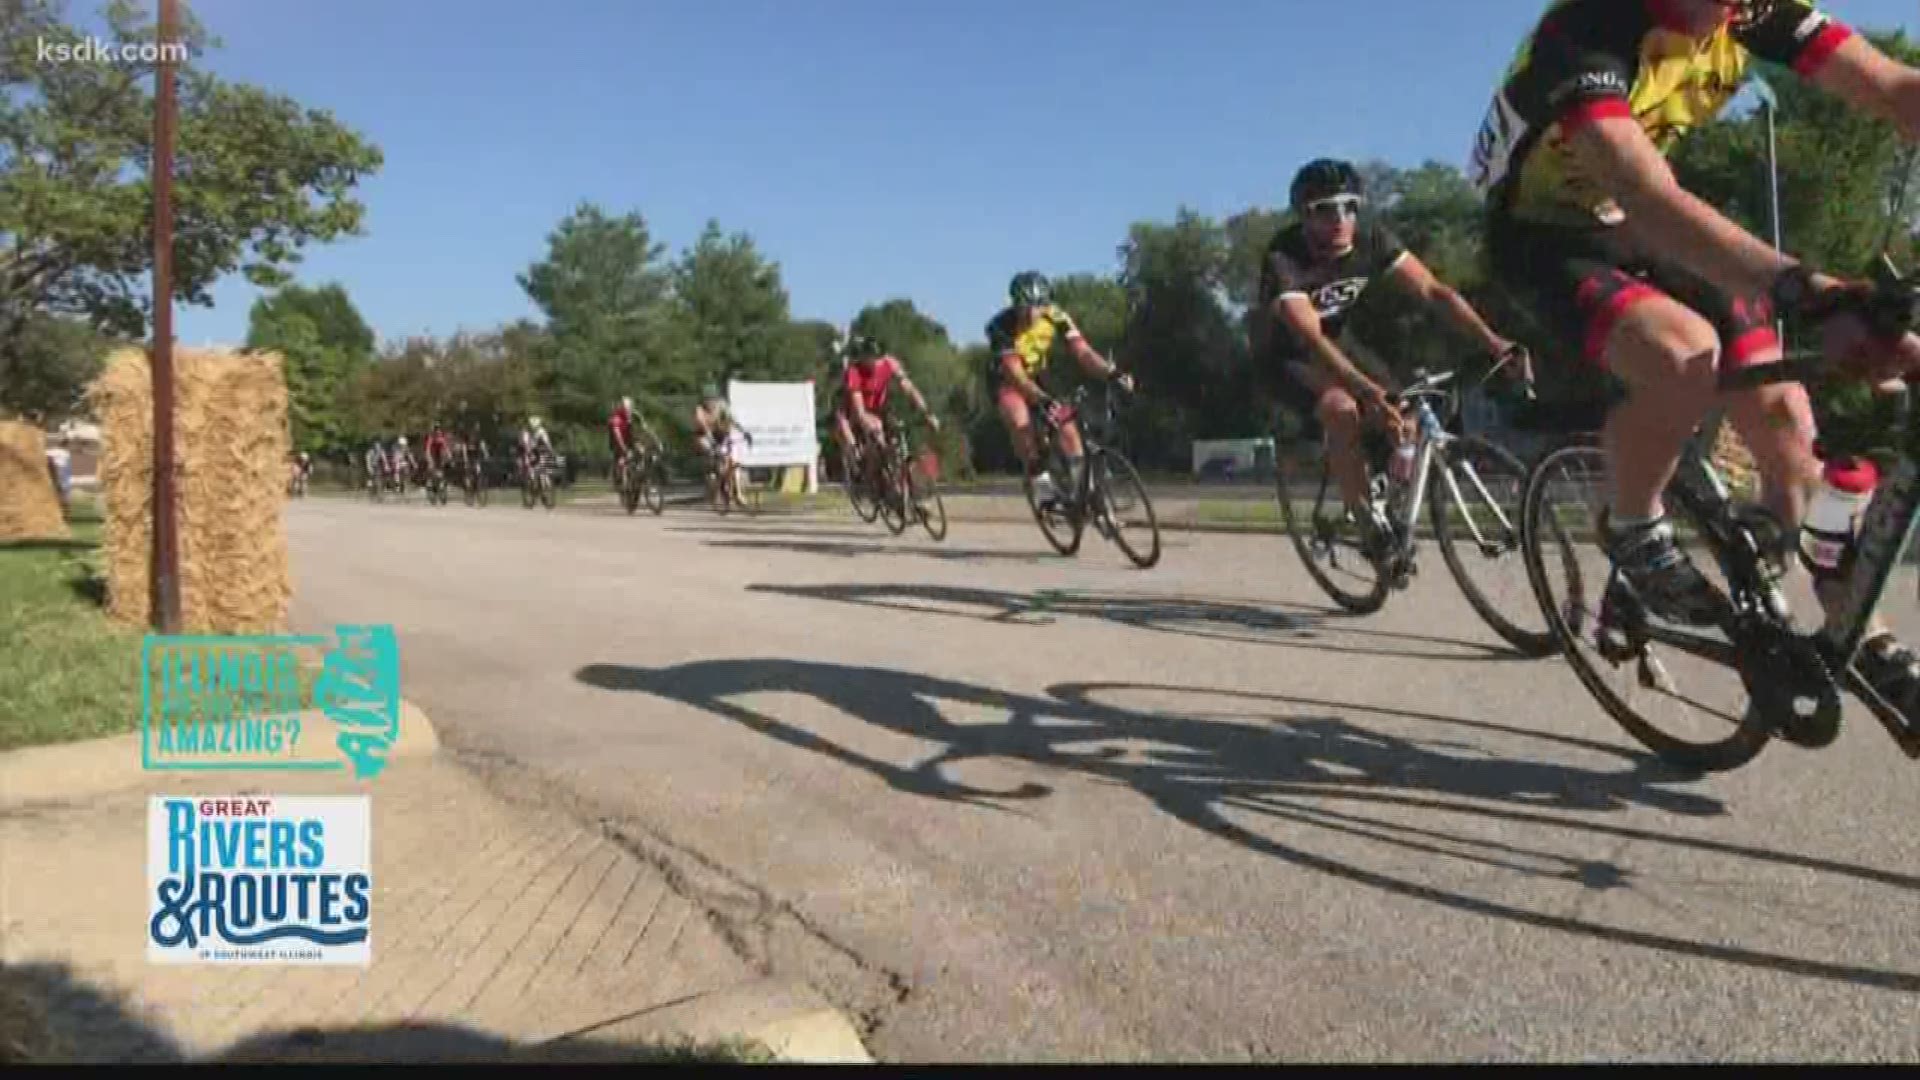 Edwardsville has it all this fall, kicking off events with the Edwardsville Rotary Criterium Festival.